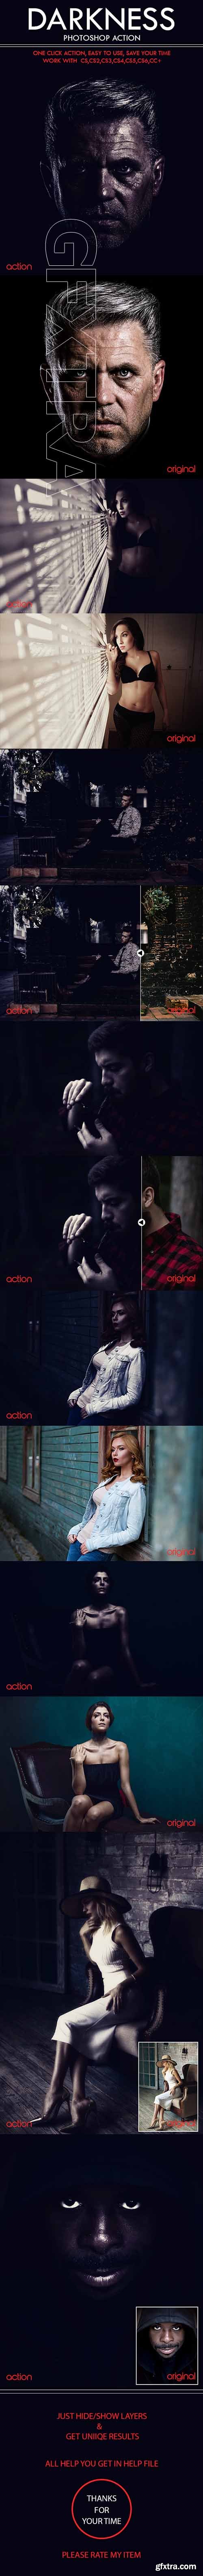 Graphicriver - Darkness Photoshop Action 21289588